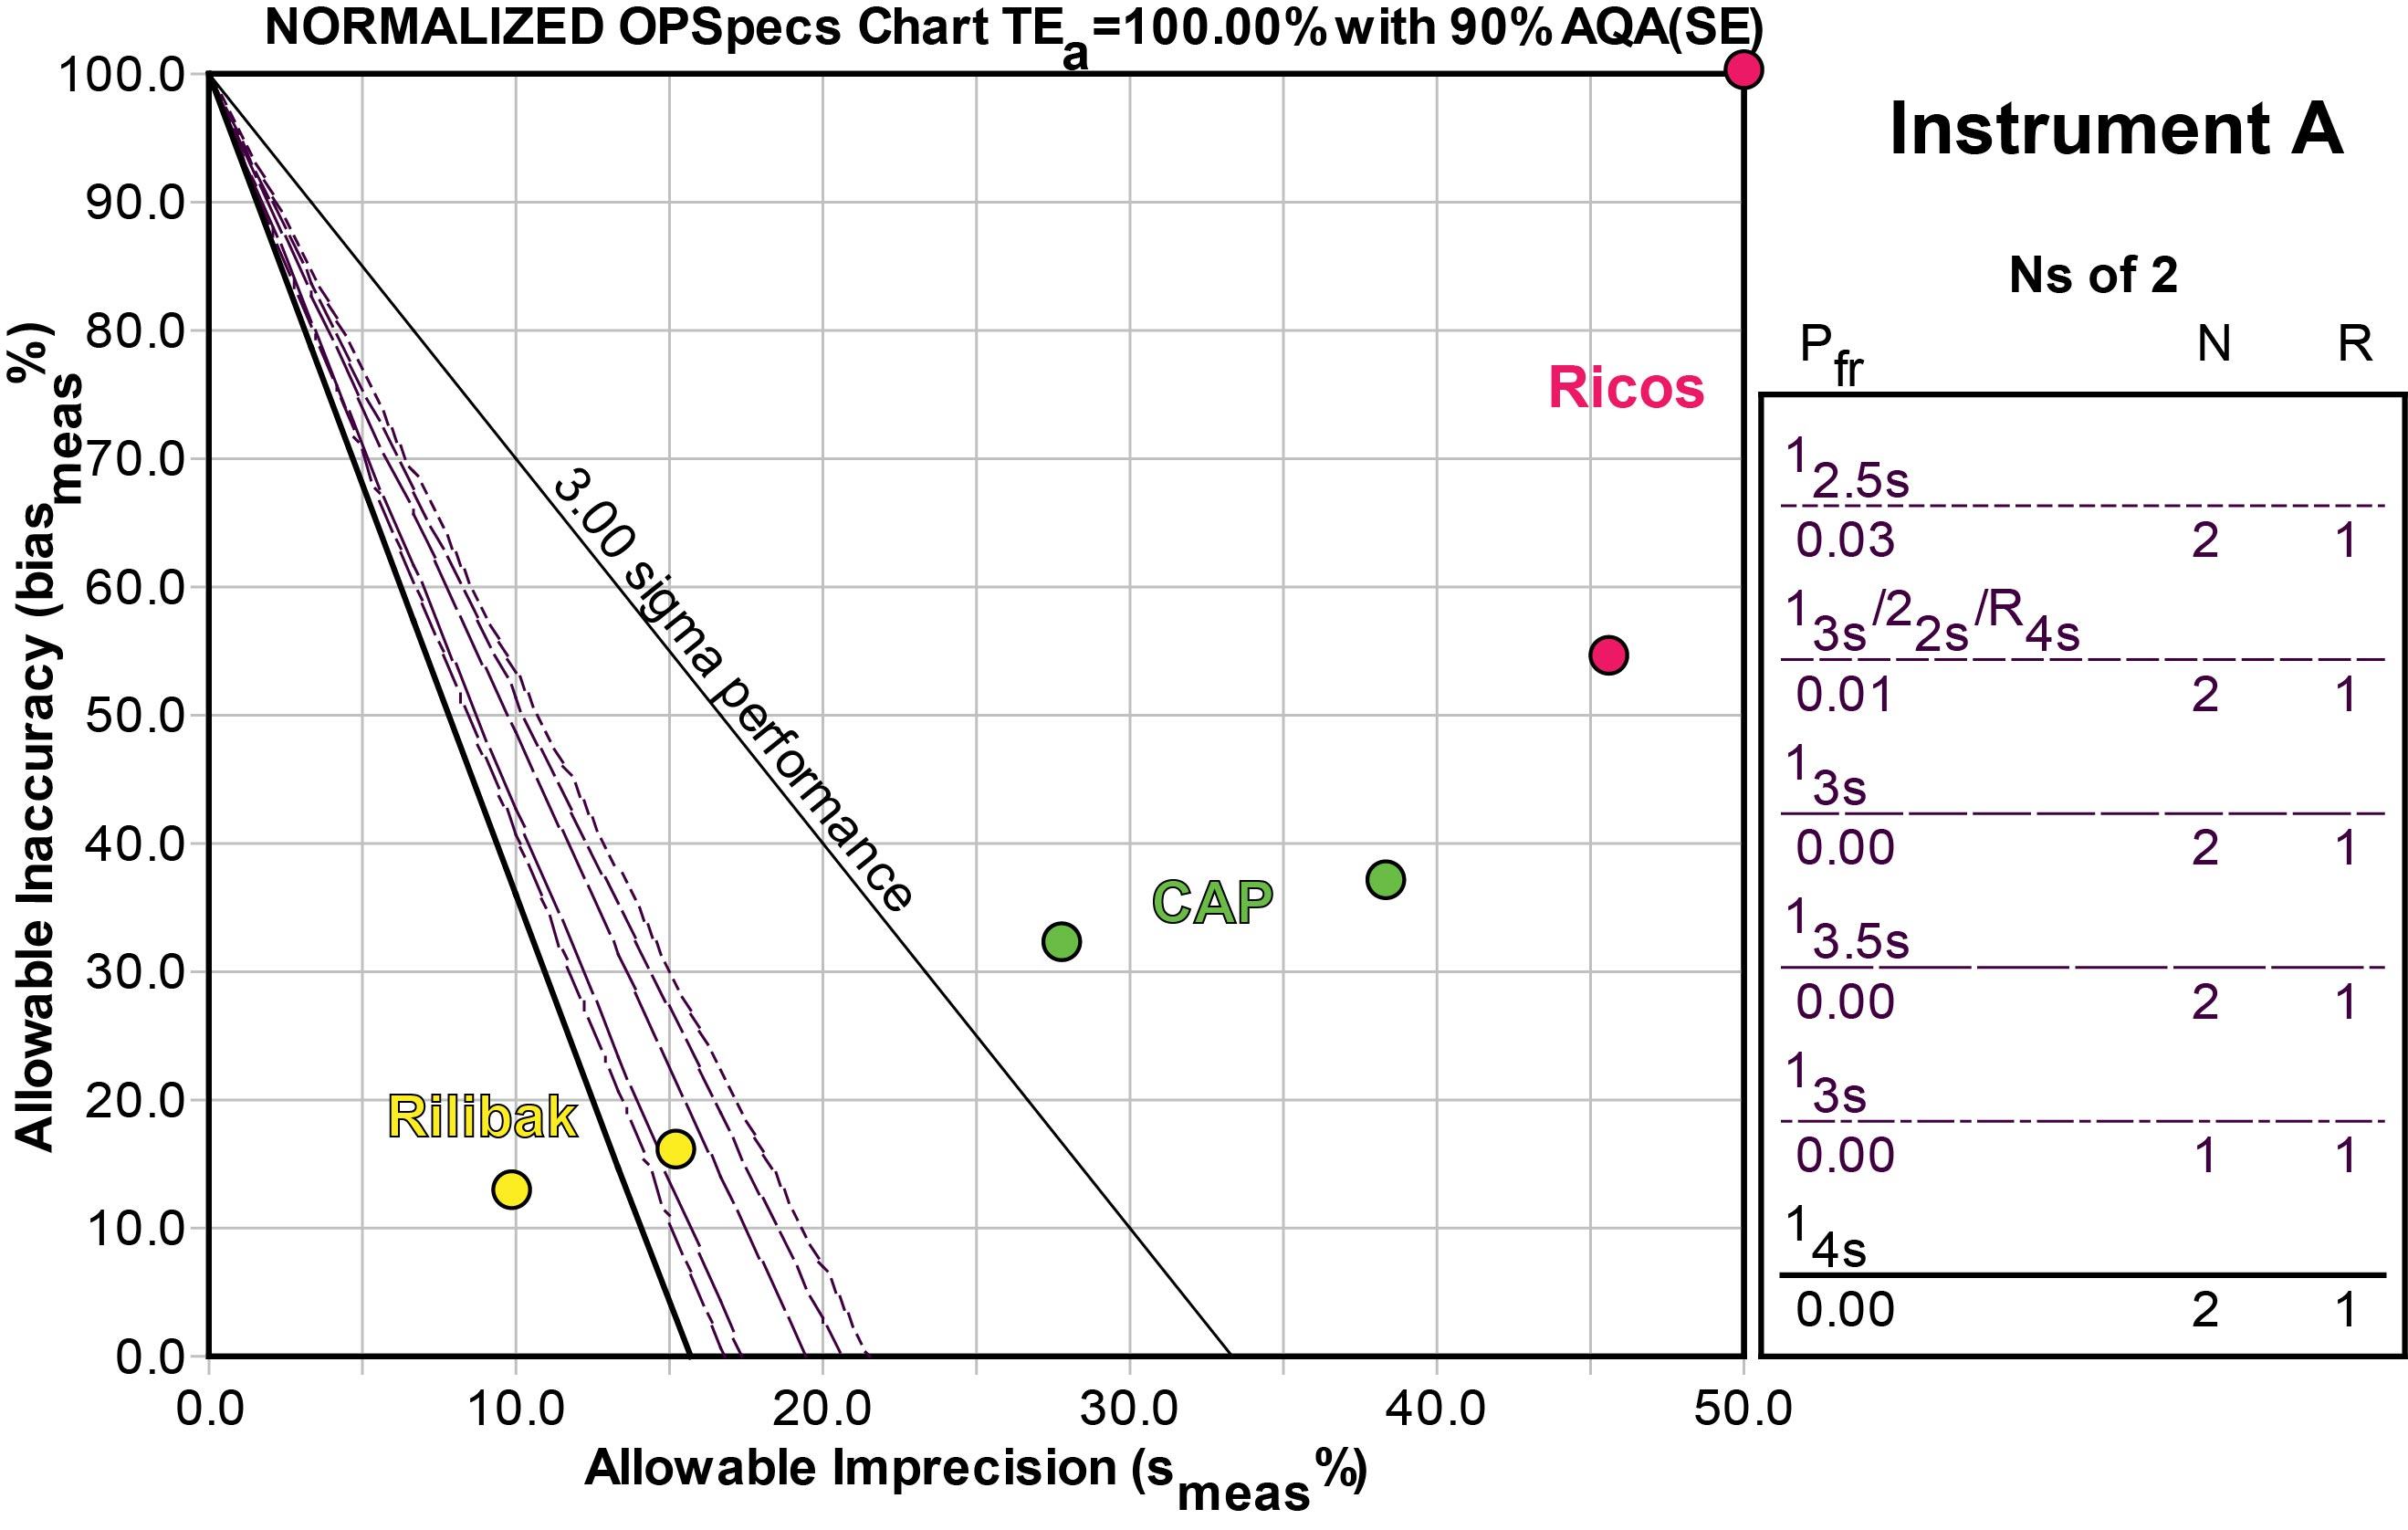 2012-HbA1c-Normalized OPSpecs chart for Method A